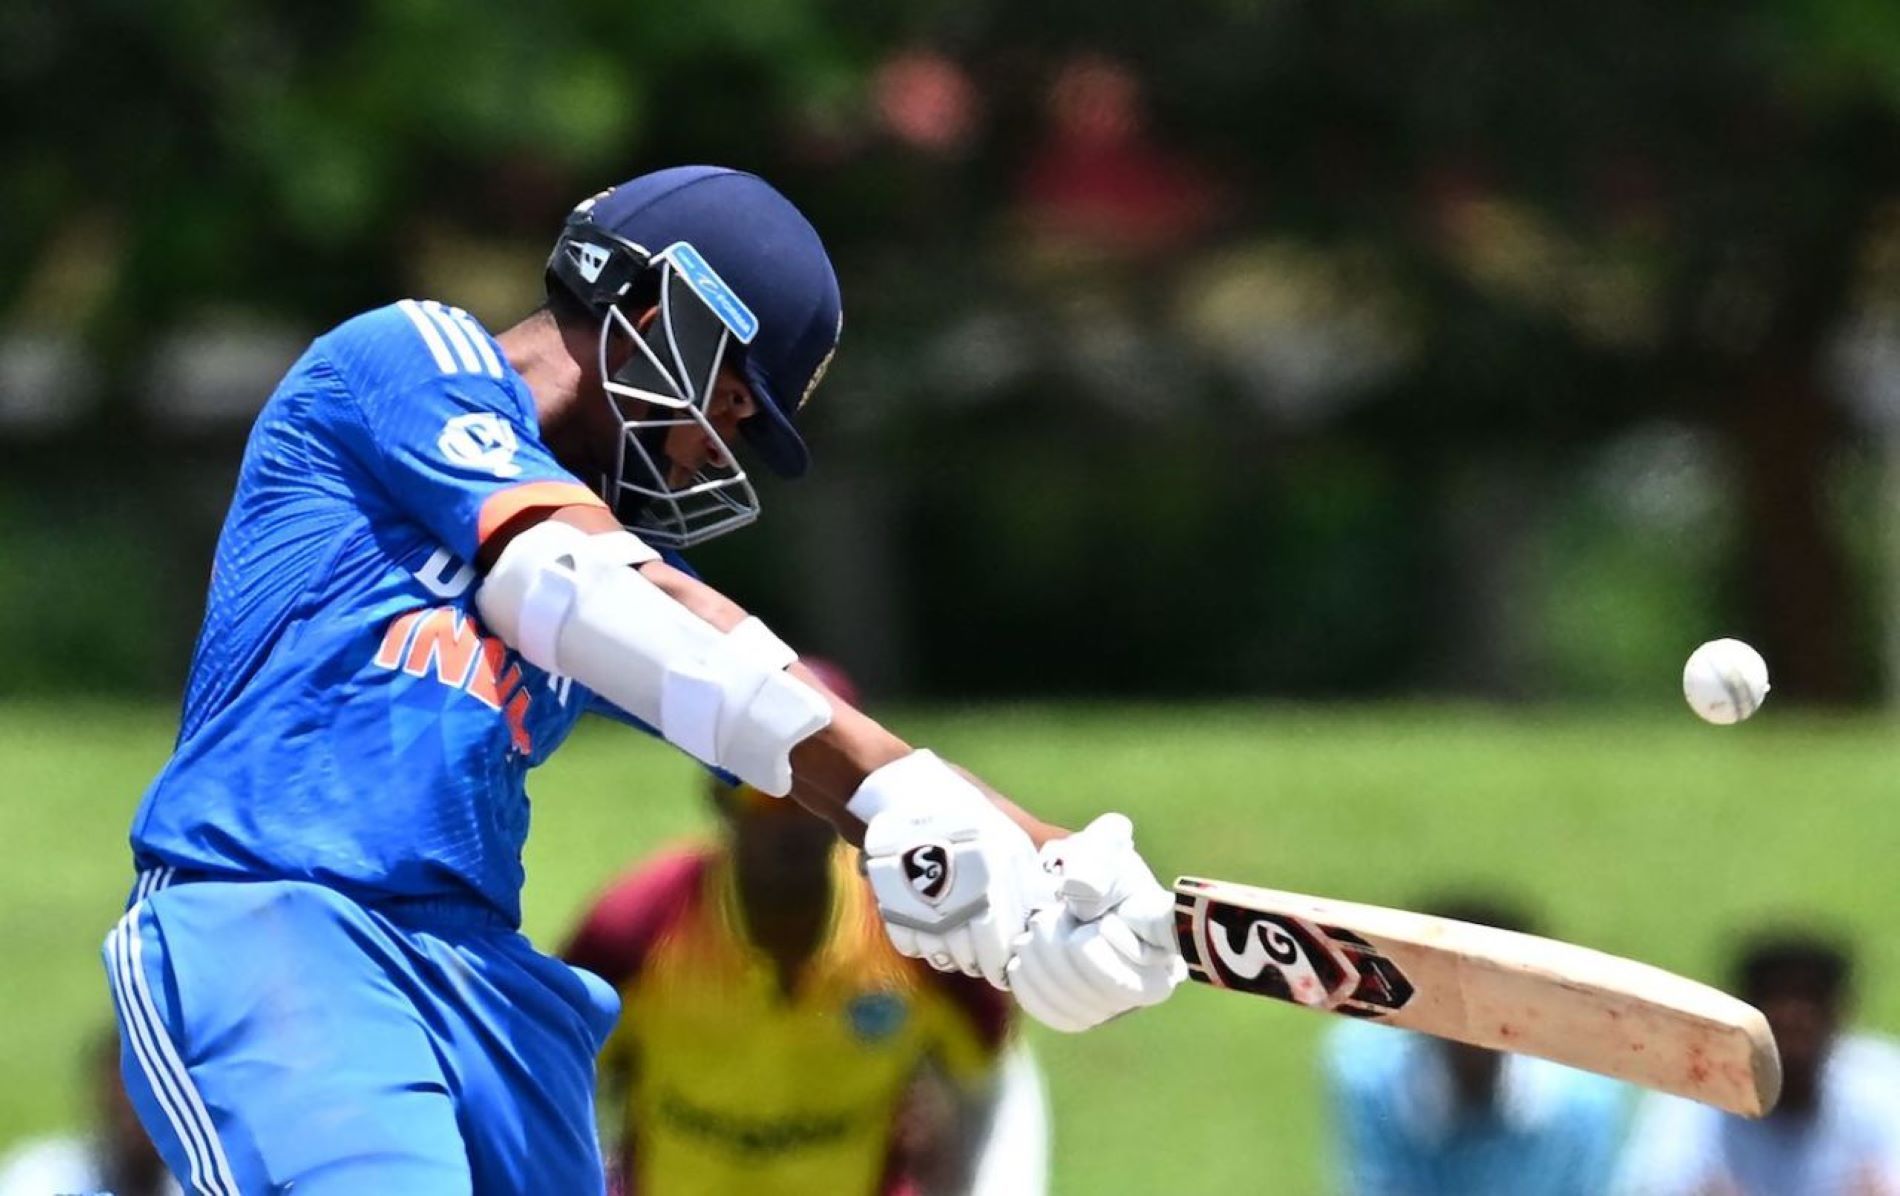 Jaiswal took the game away from the hosts during his sparkling innings